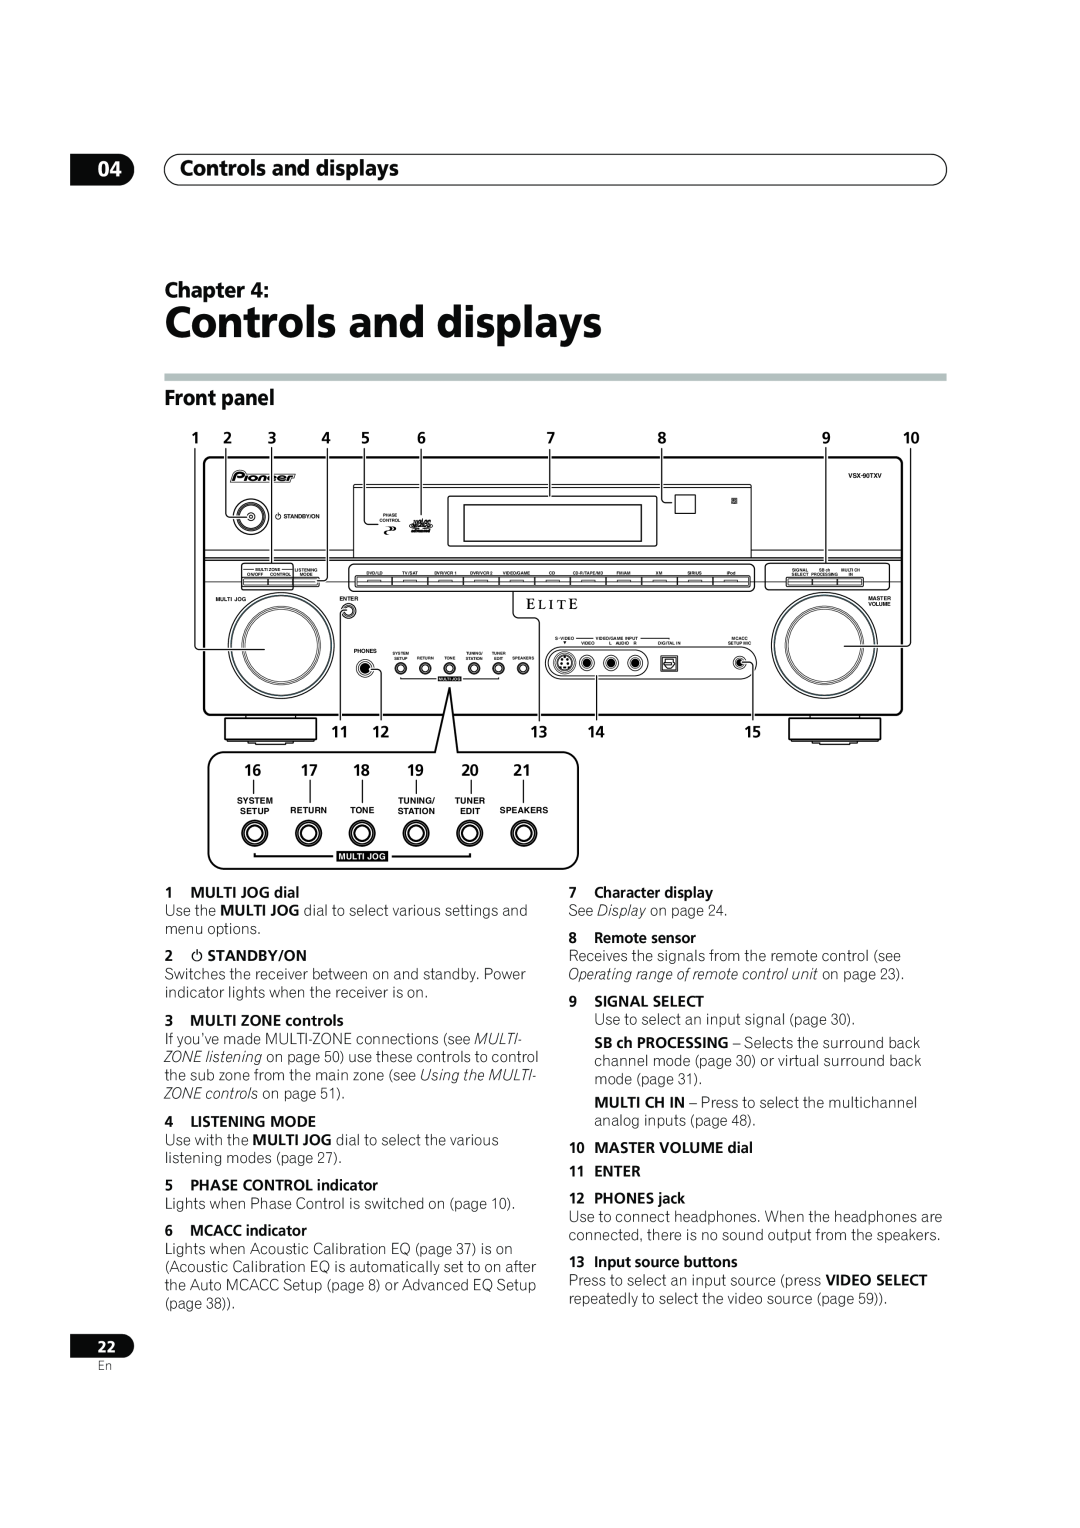 Pioneer VSX-90TXV operating instructions 04Controls and displays Chapter, Front panel 